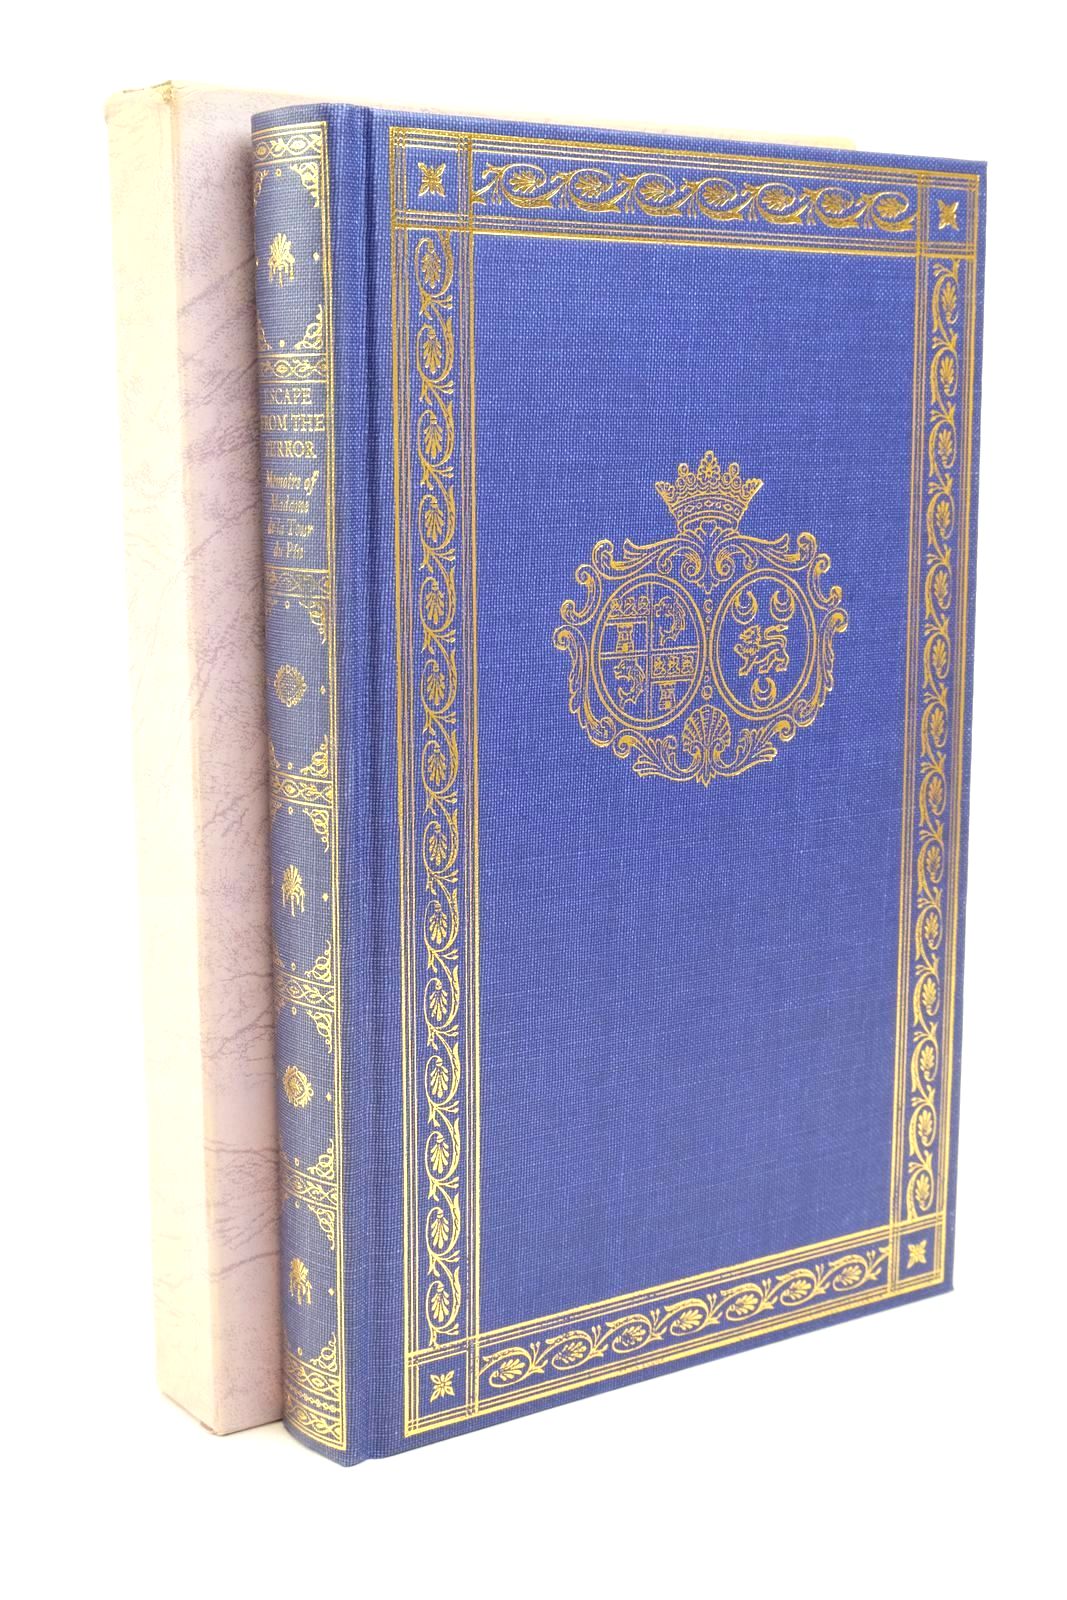 Photo of ESCAPE FROM THE TERROR written by De La Tour Du Pin, Madame Harcourt, Felice published by Folio Society (STOCK CODE: 1322884)  for sale by Stella & Rose's Books